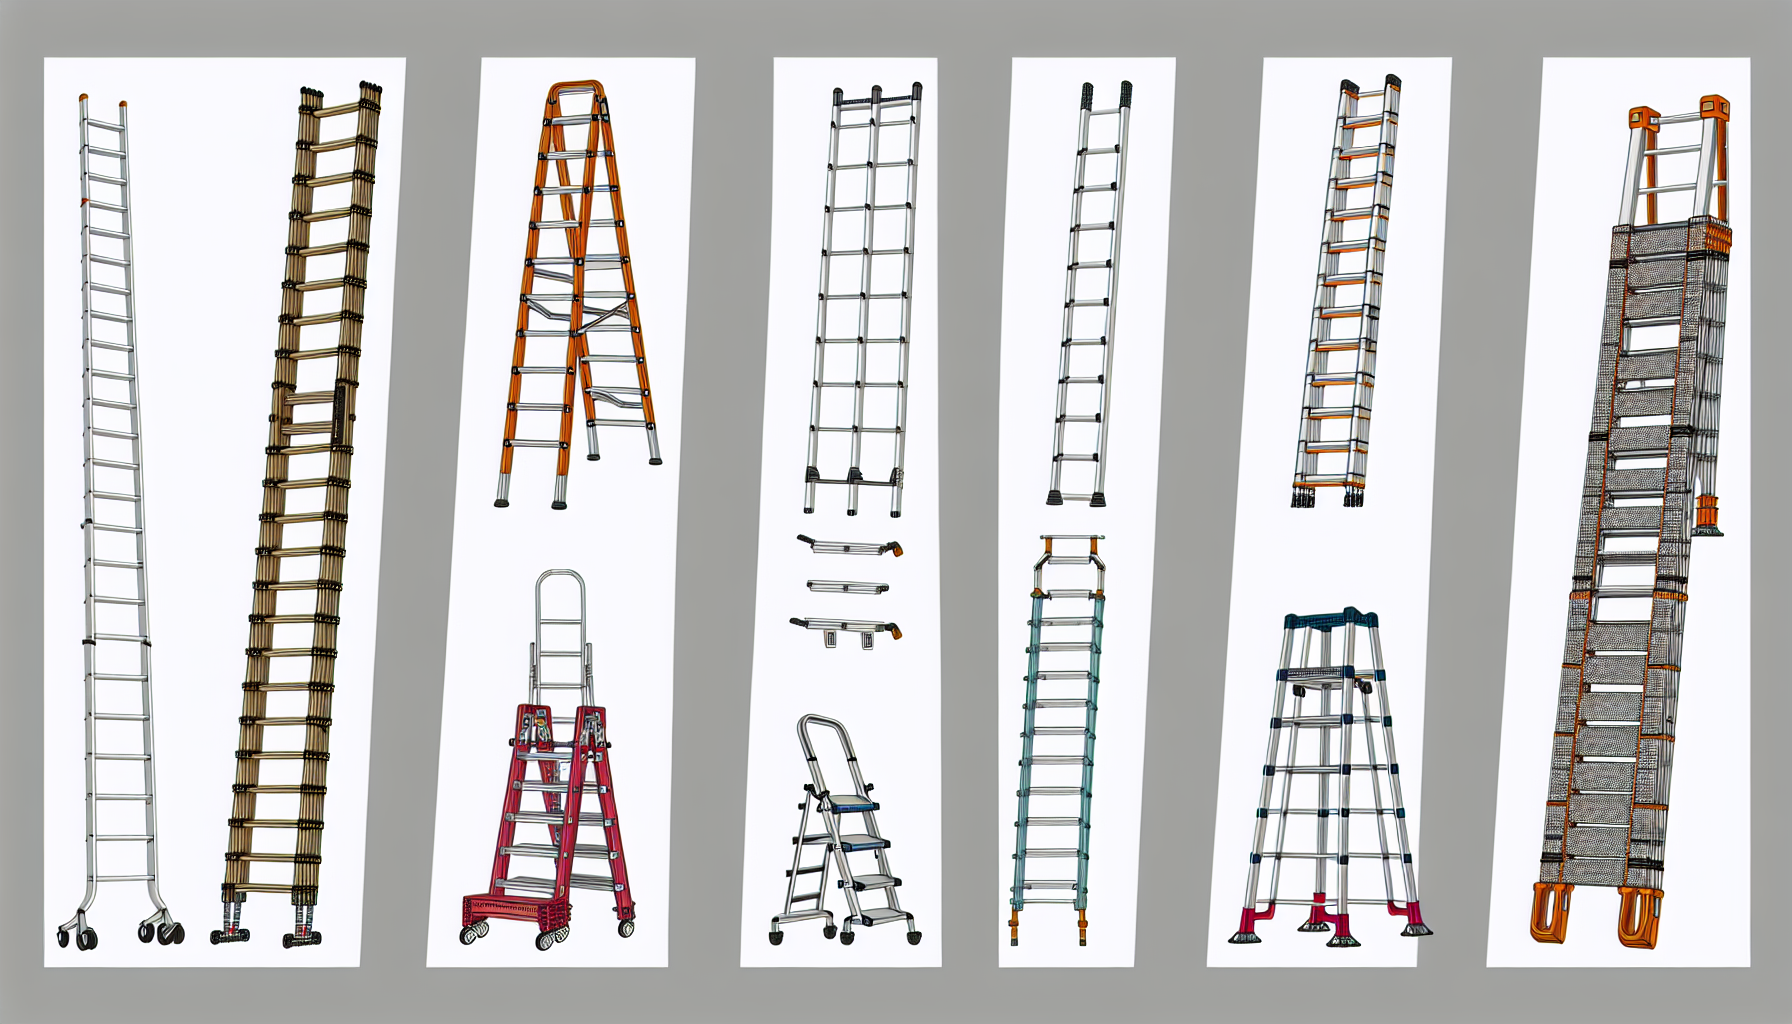 Various types of ladders for different tasks